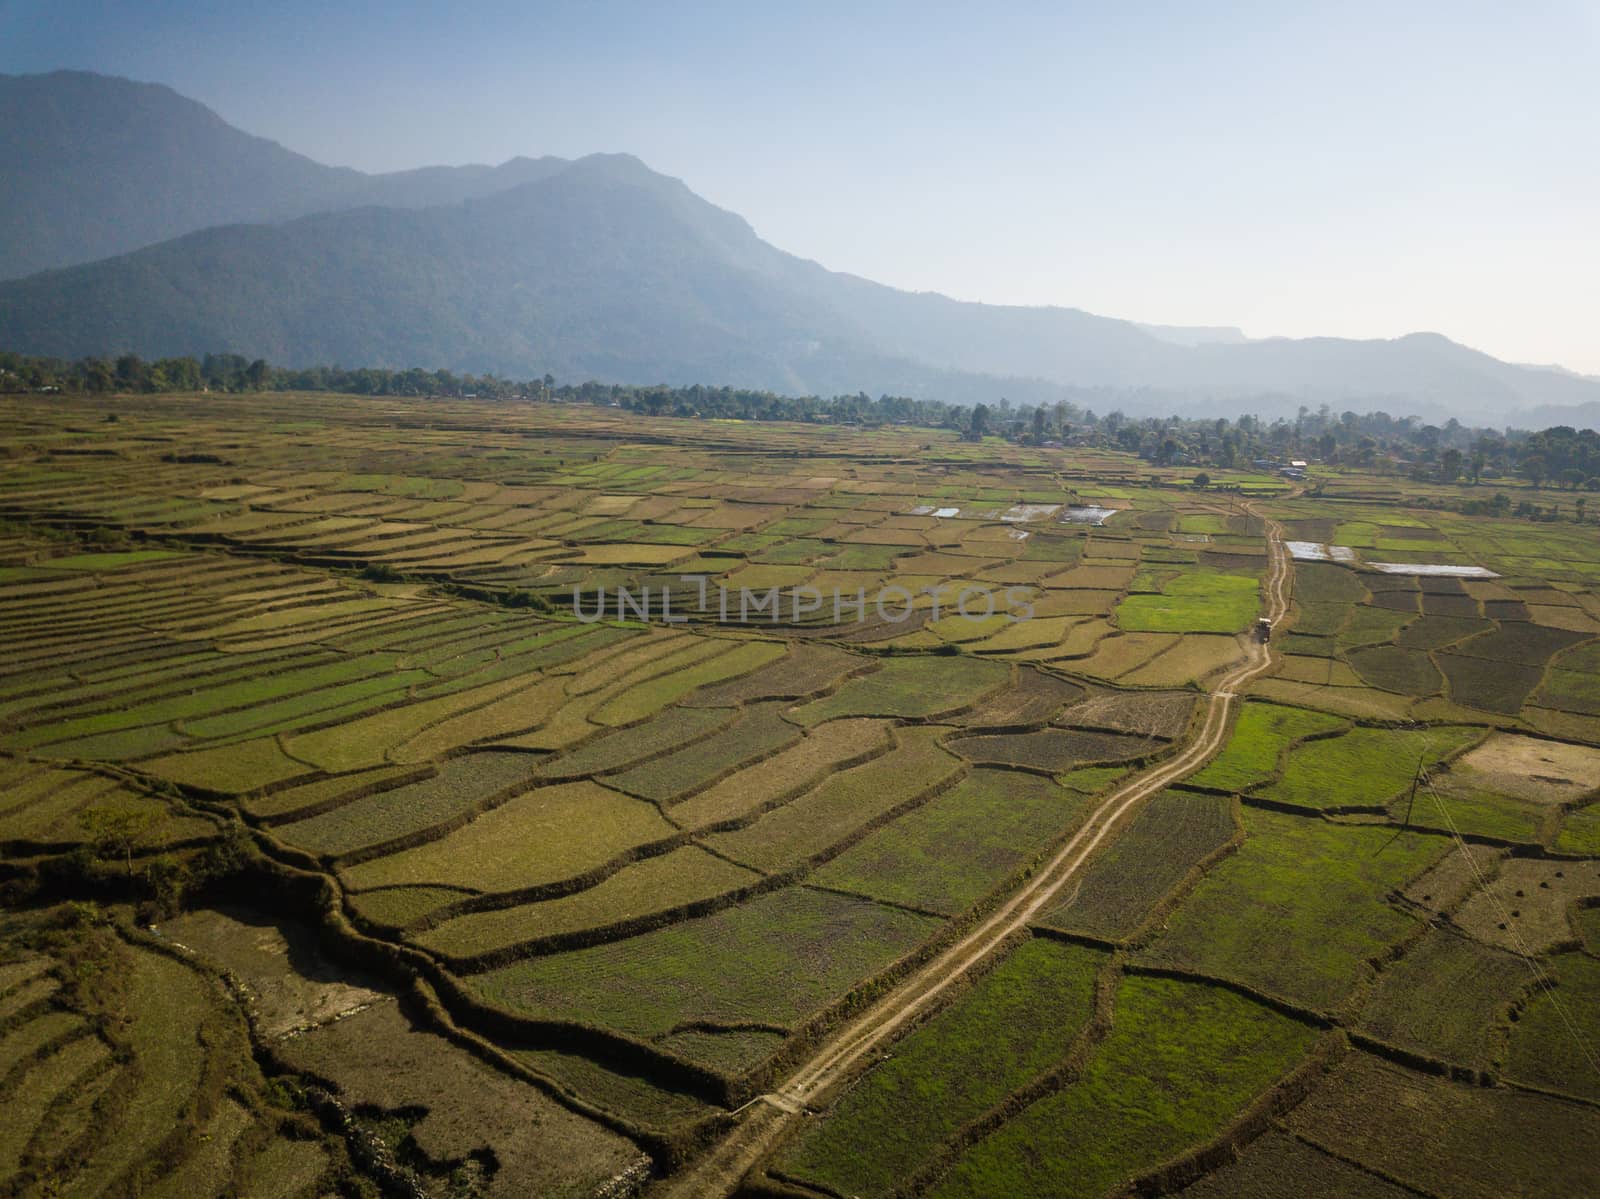 Aerial view of rural landscape in central Nepal. Paddy fields and hills in winter.